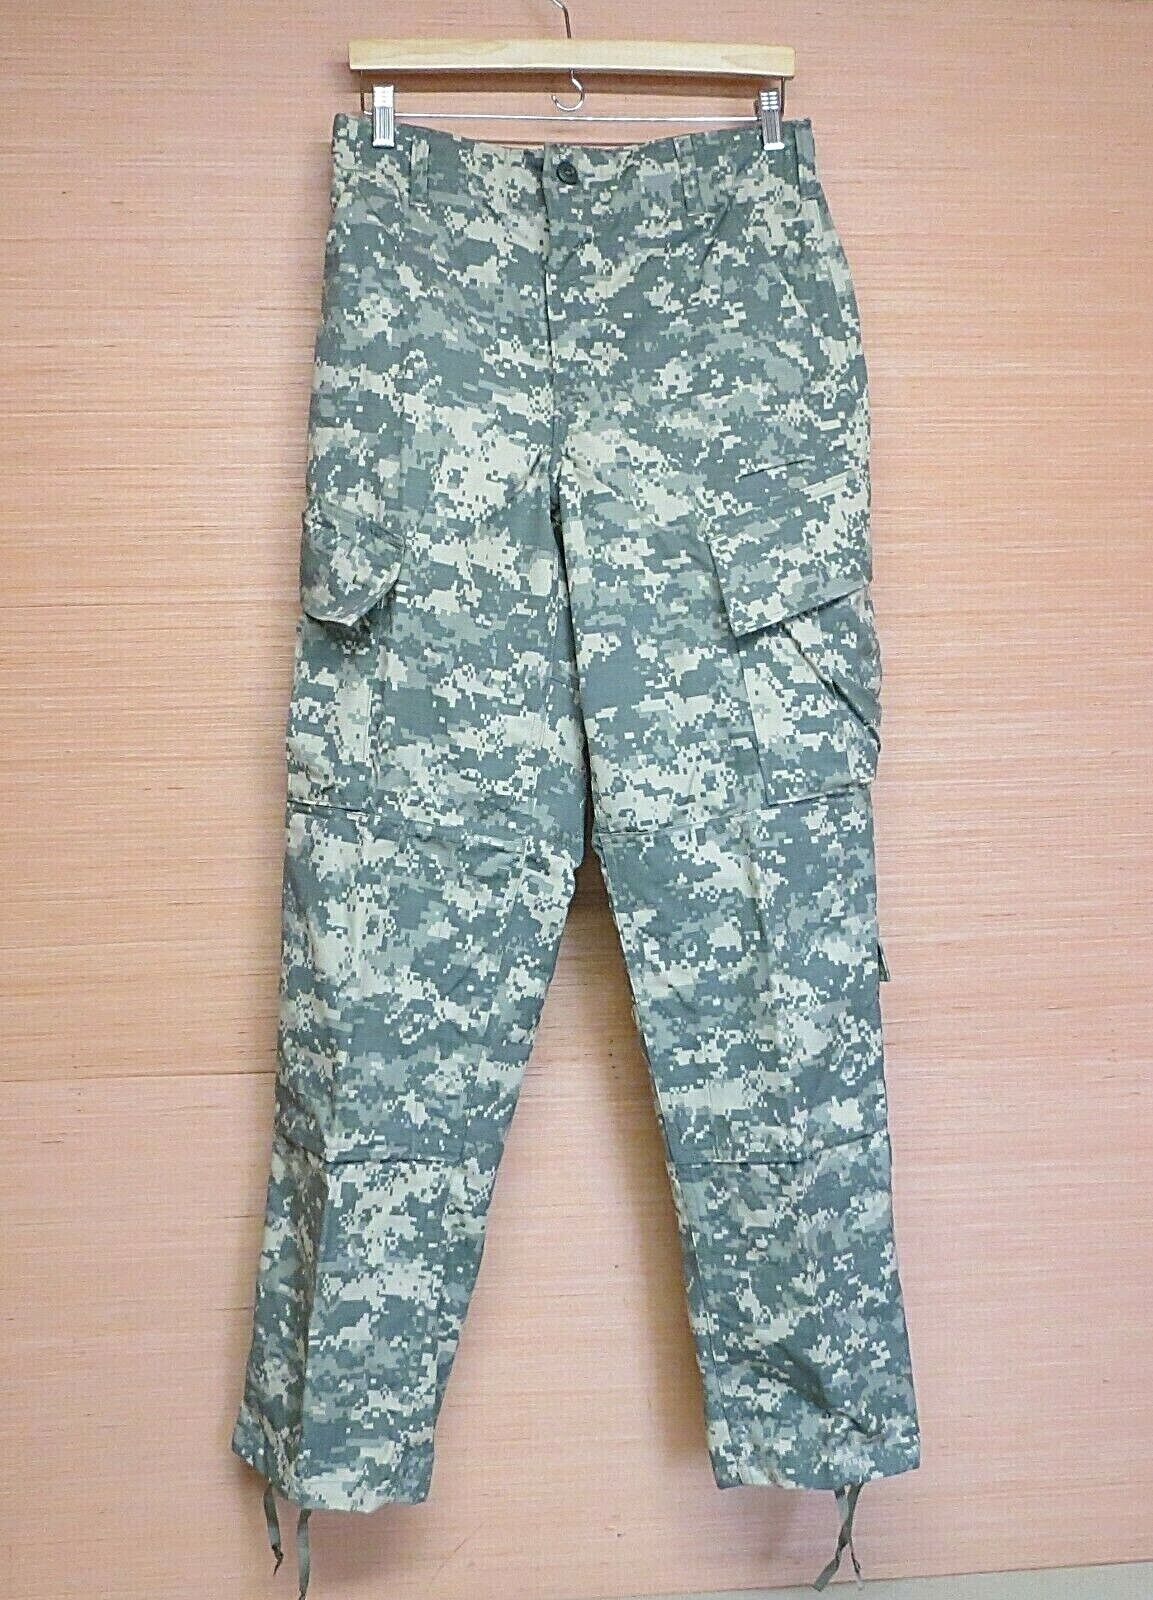 US Military Issue Army Combat Uniform ACU Camo Pants Trousers Size Small Regular